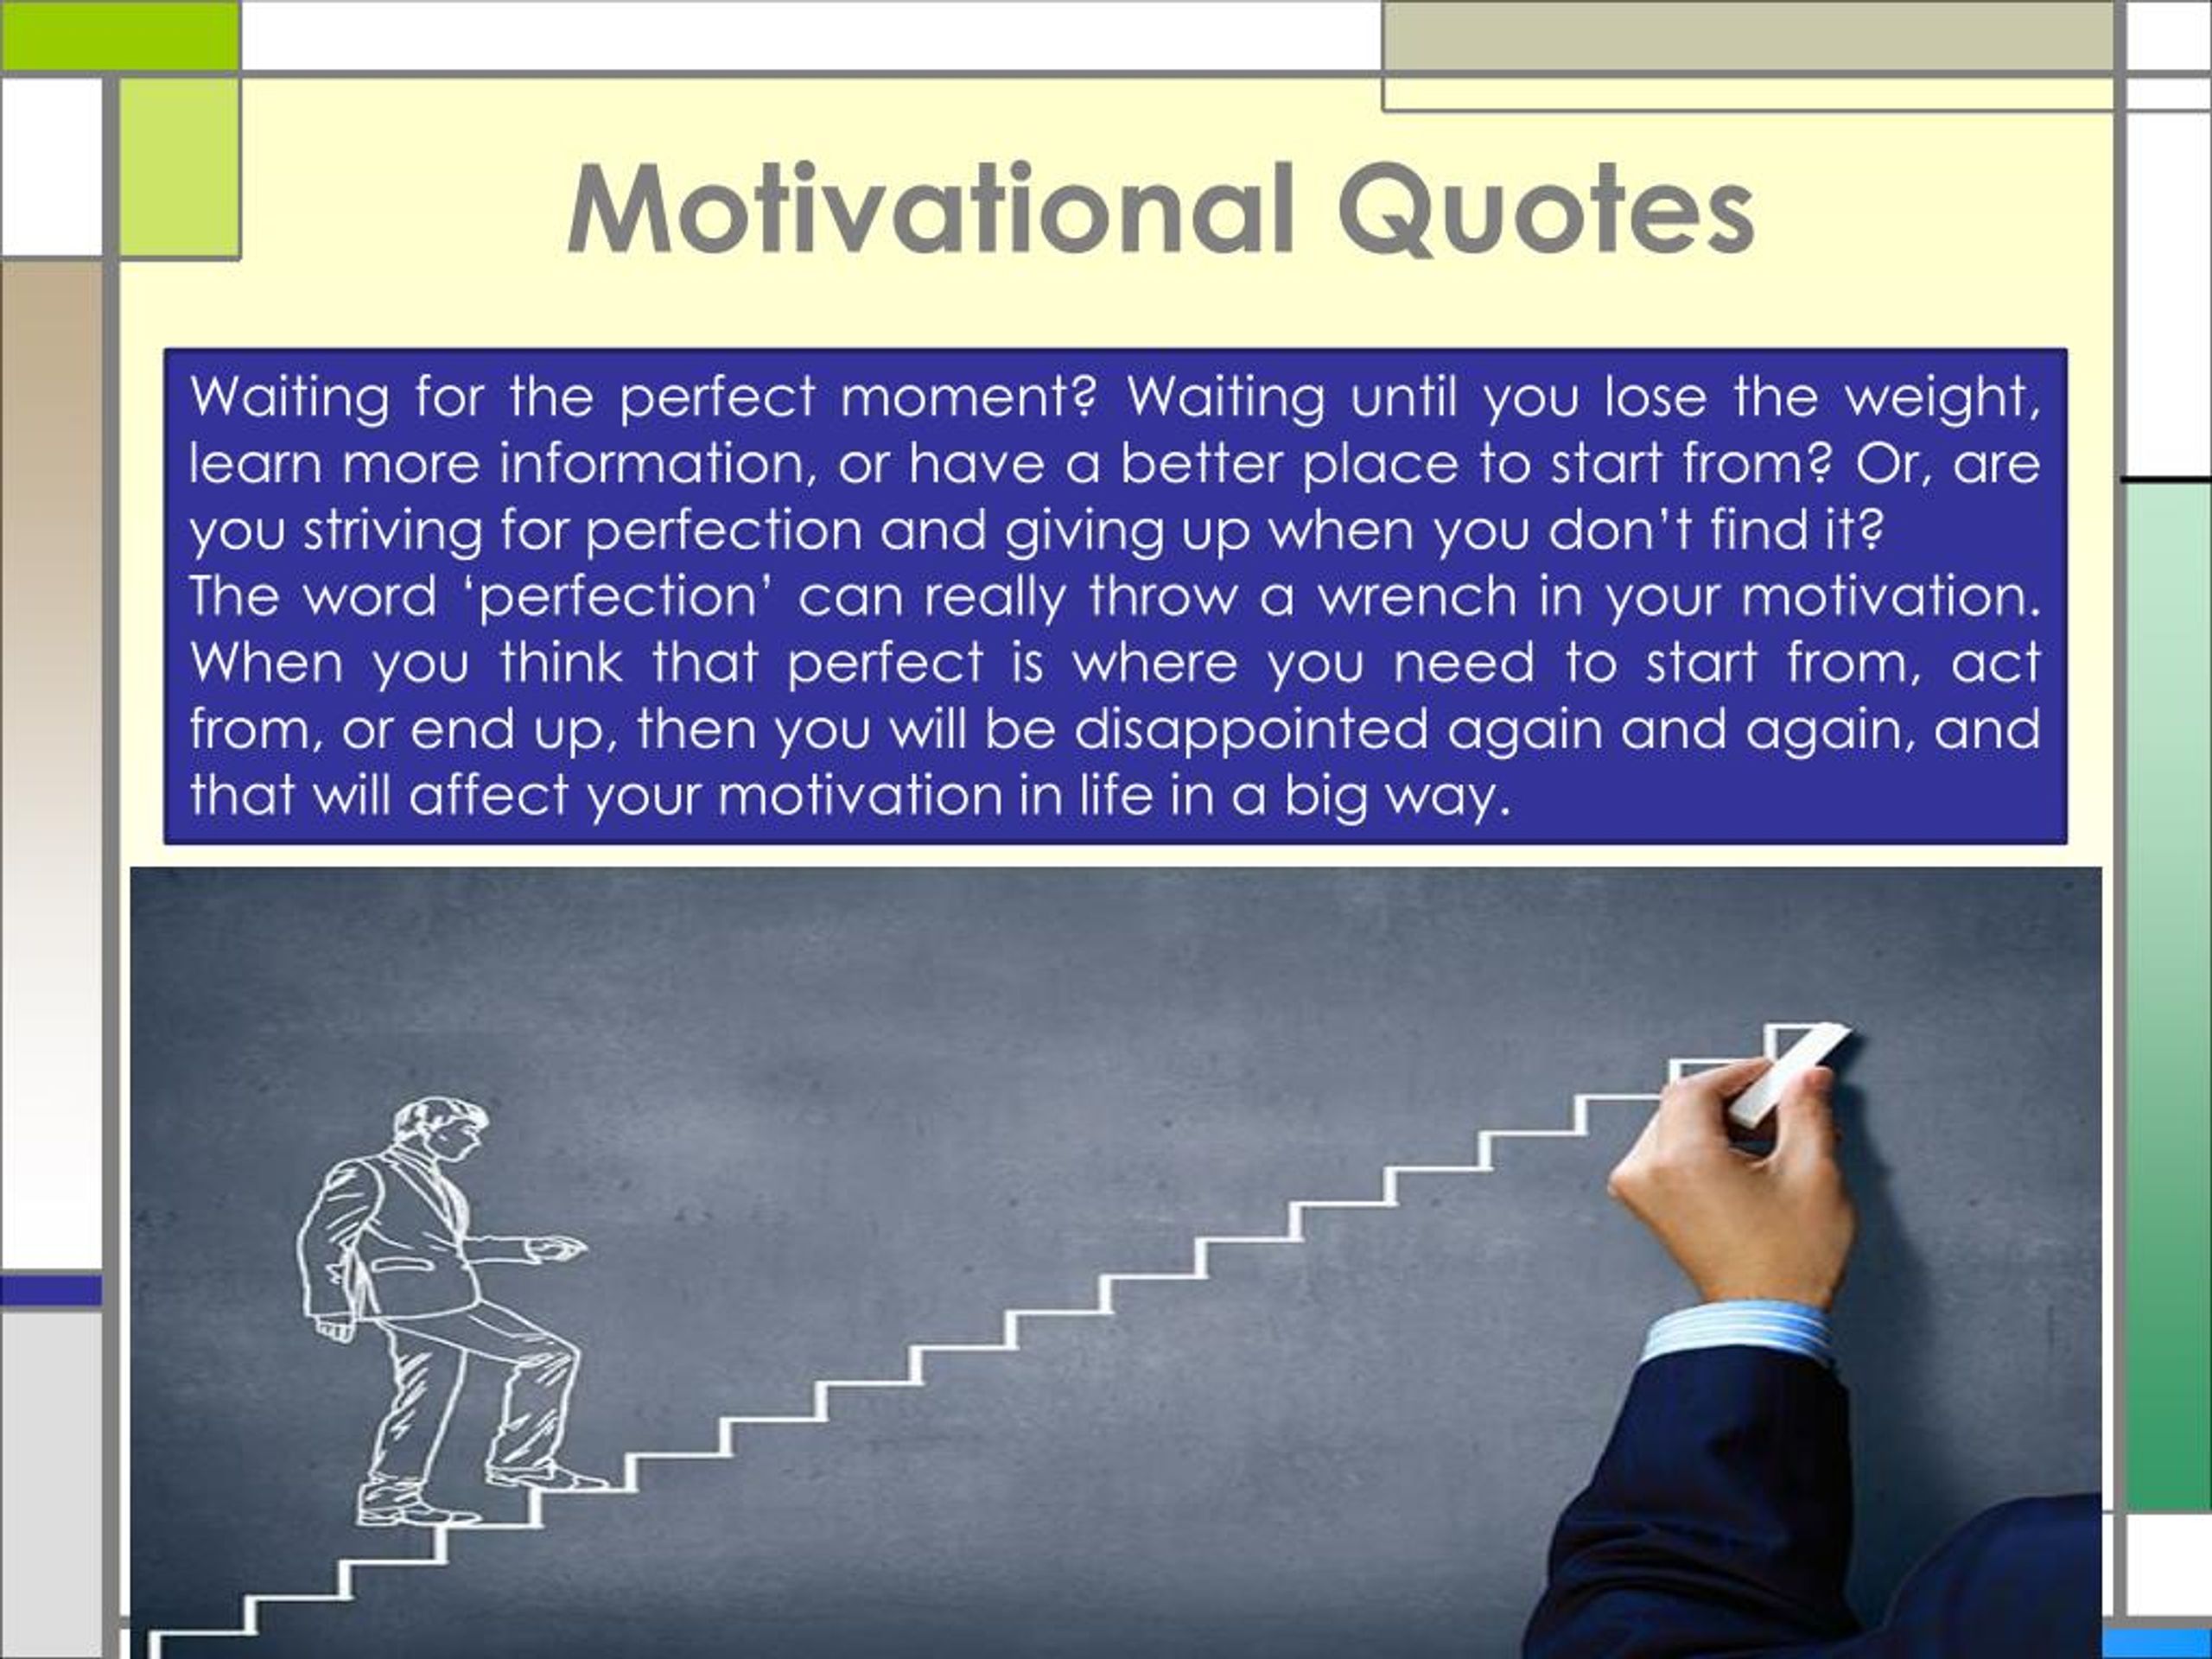 PPT - Motivational Quotes PowerPoint Presentation, free download - ID